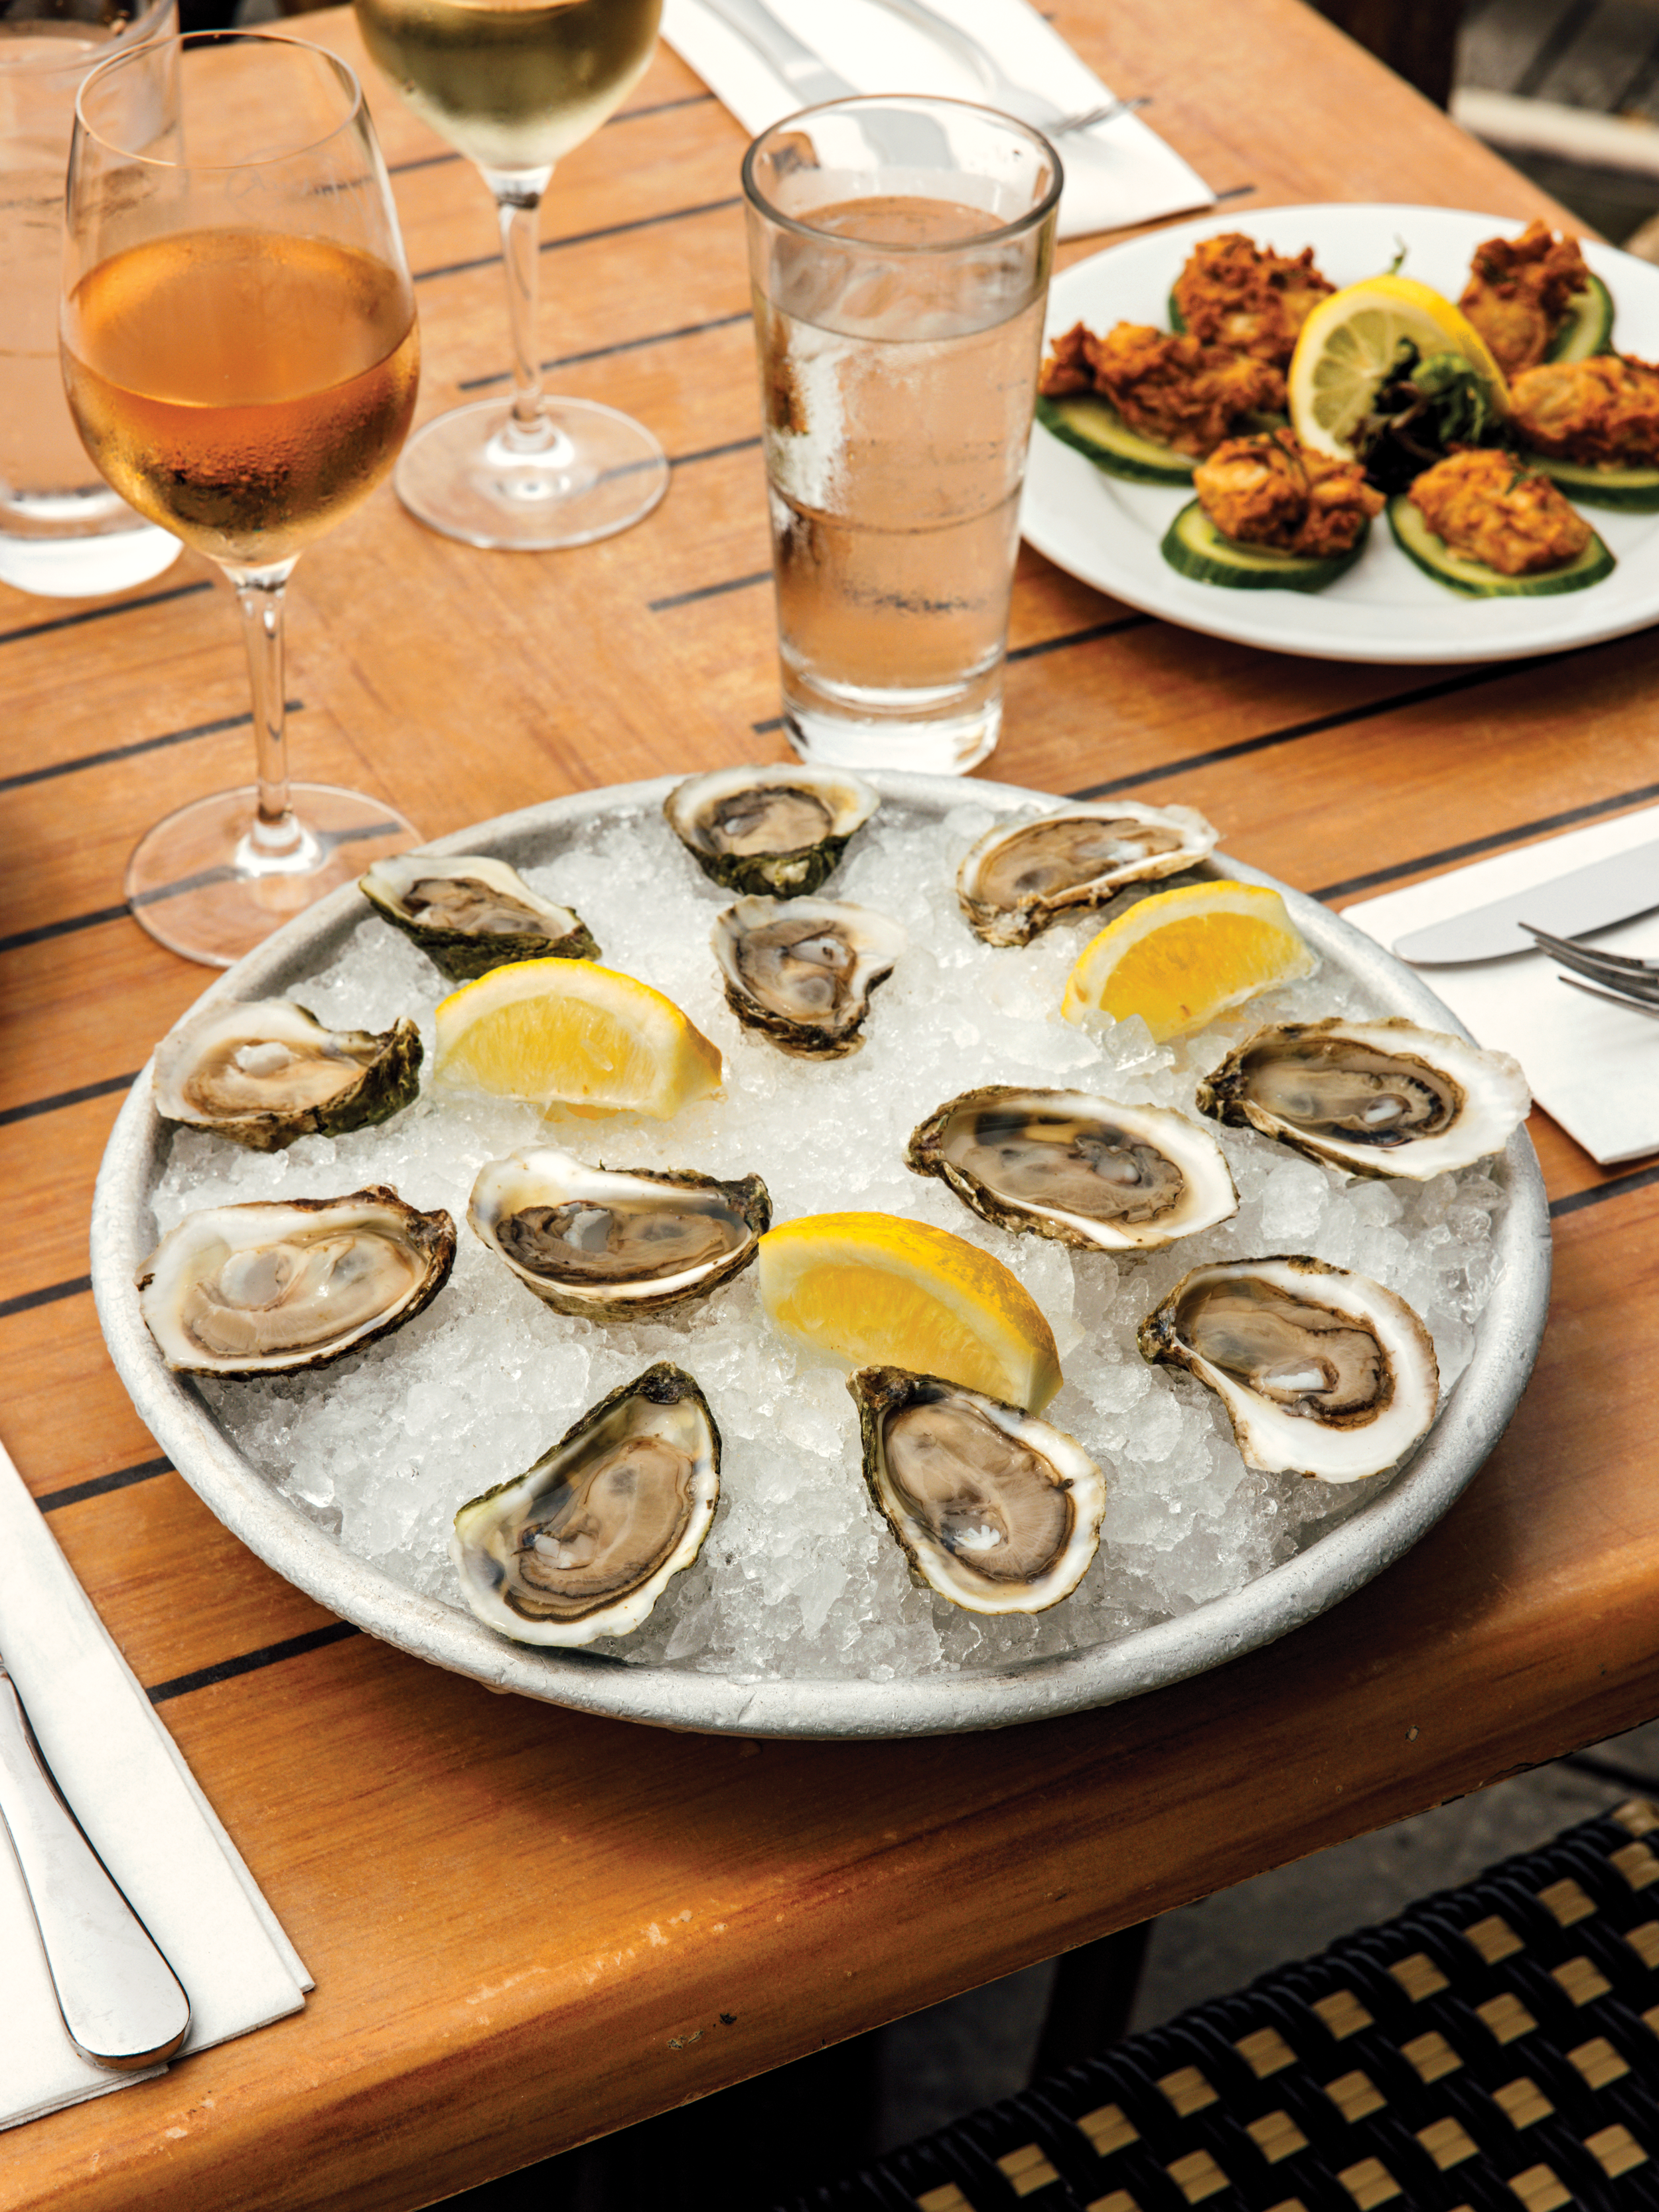 InPickleball | Go There | Sample oysters on ice at Matunuck Oyster Bar